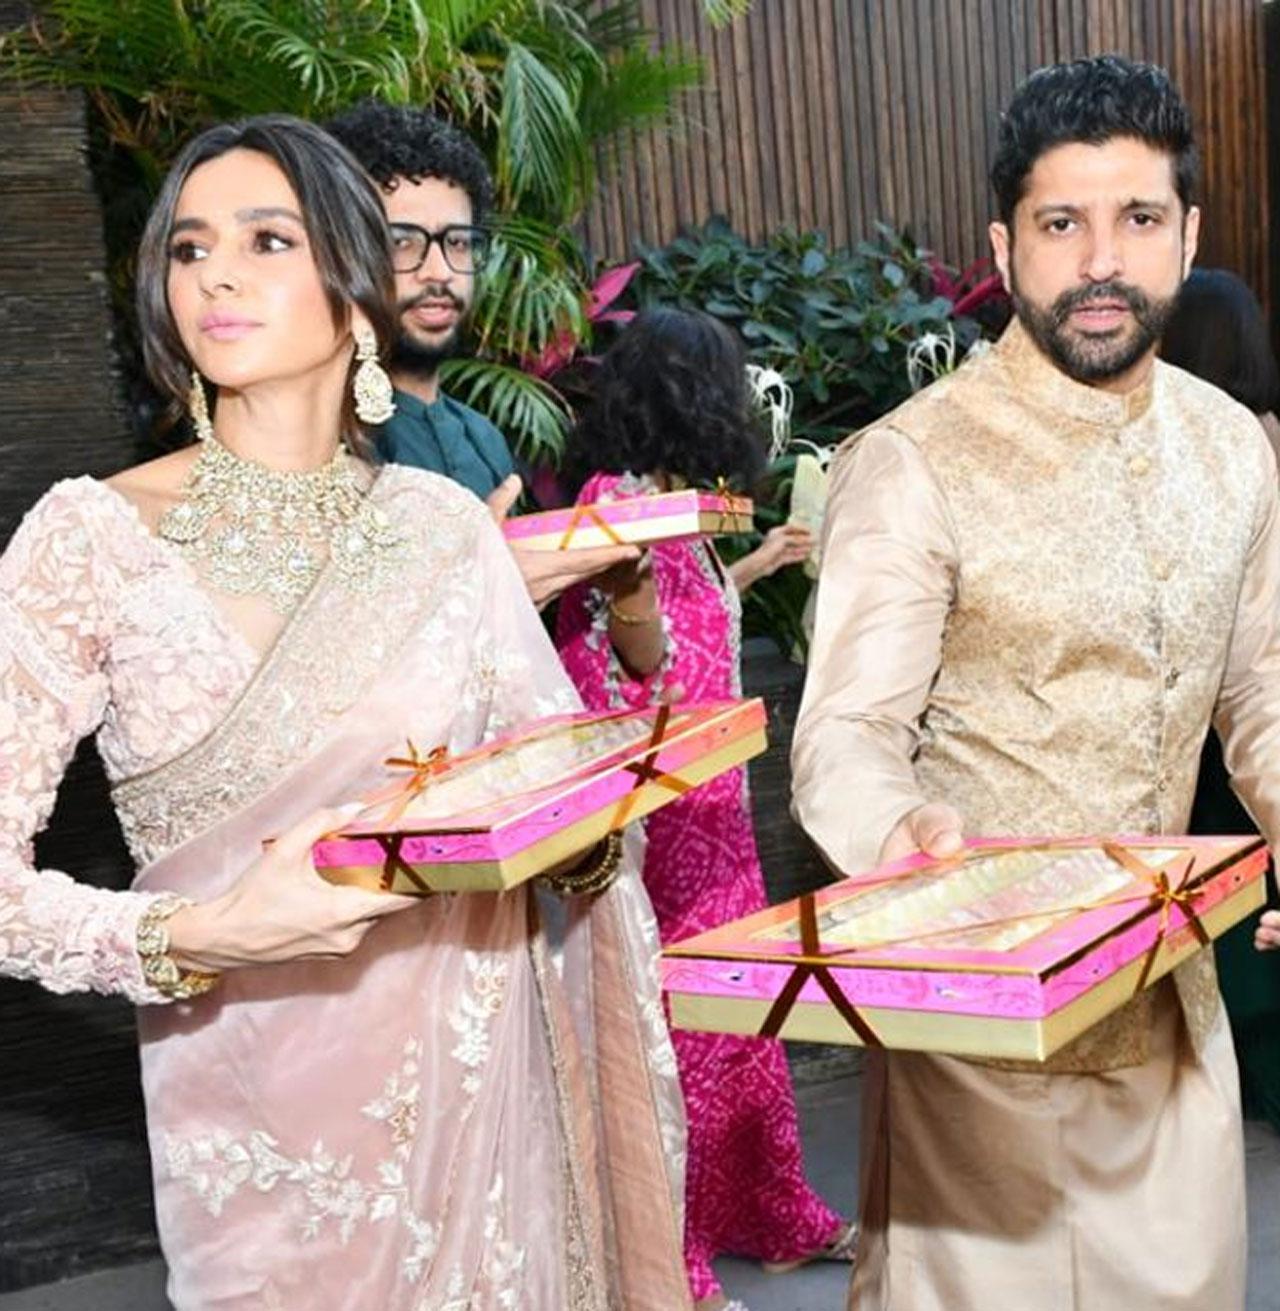 The couple looked stunning and stylish in their tradional attire. Farhan and Shibani, who have been dating for almost three years now, got married in an intimate ceremony in Khandala. Hrithik Roshan, Farah Khan, Shankar Mahadevan, Amrita Arora, Samir Kocchar, Saqib Saleem and Rhea Chakraborty, among others, were present at the low-key function.